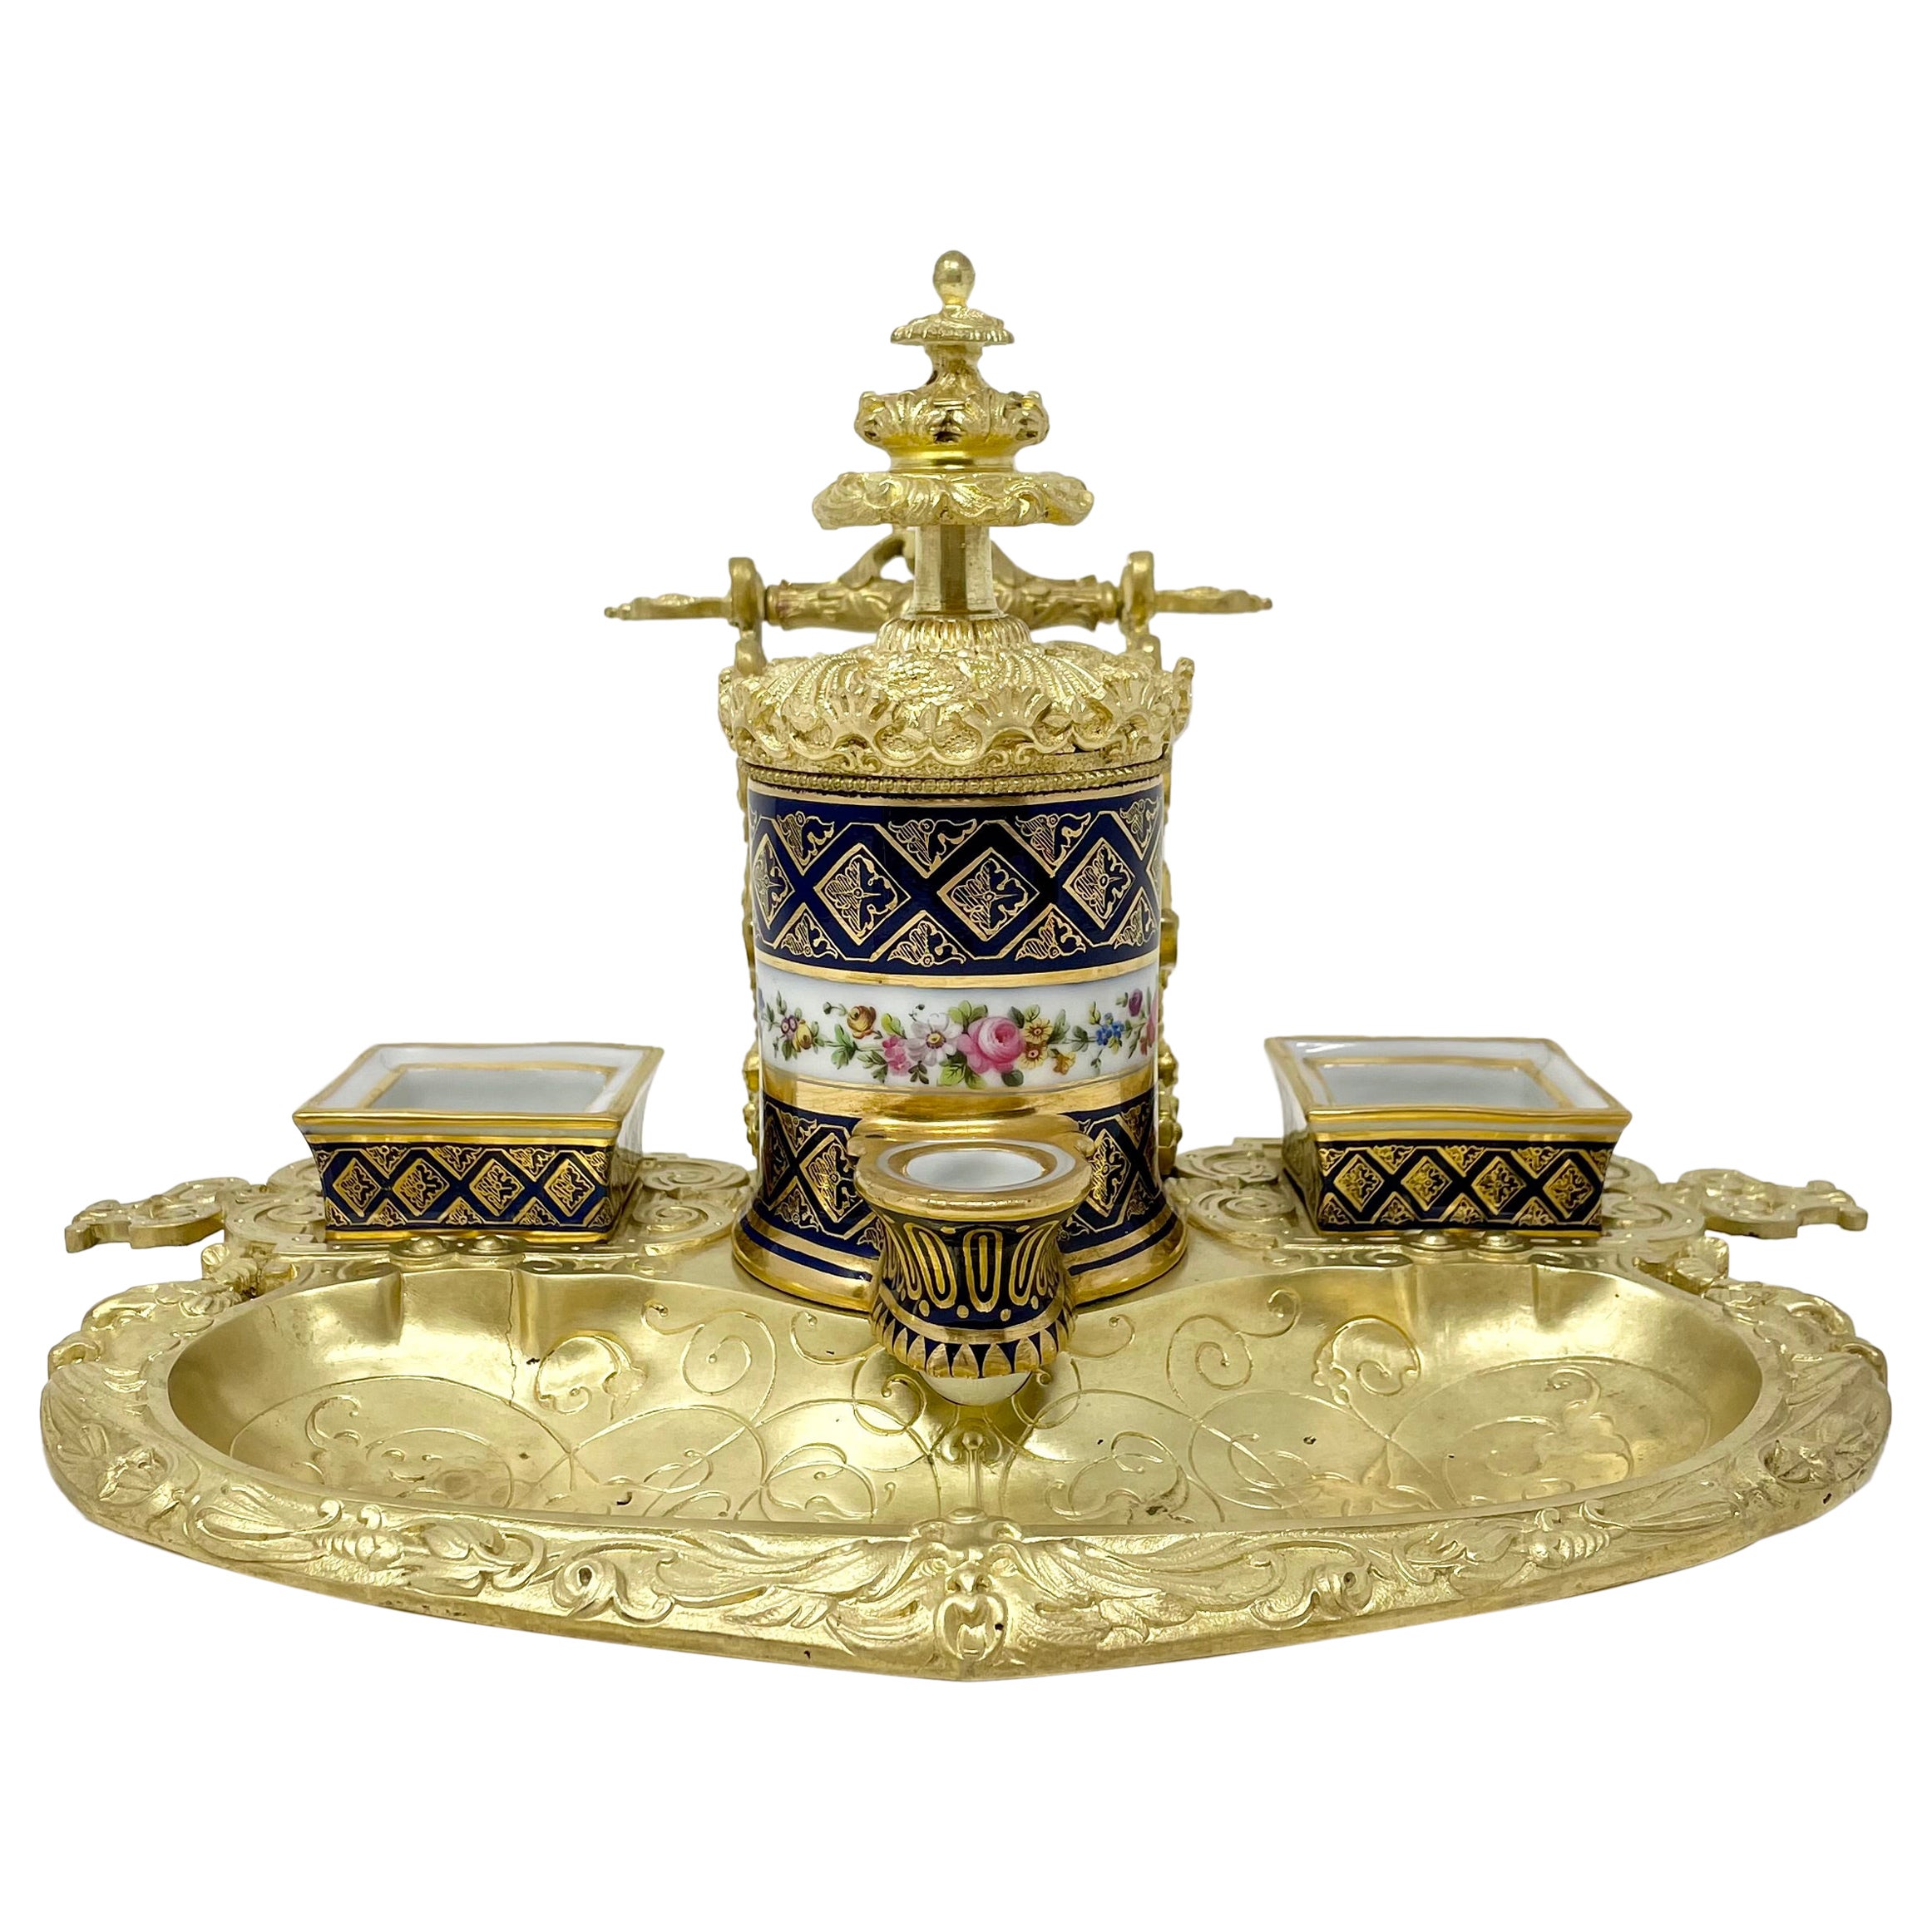 Antique French Old Paris Porcelain & Gold Bronze Inkwell, Circa 1840.